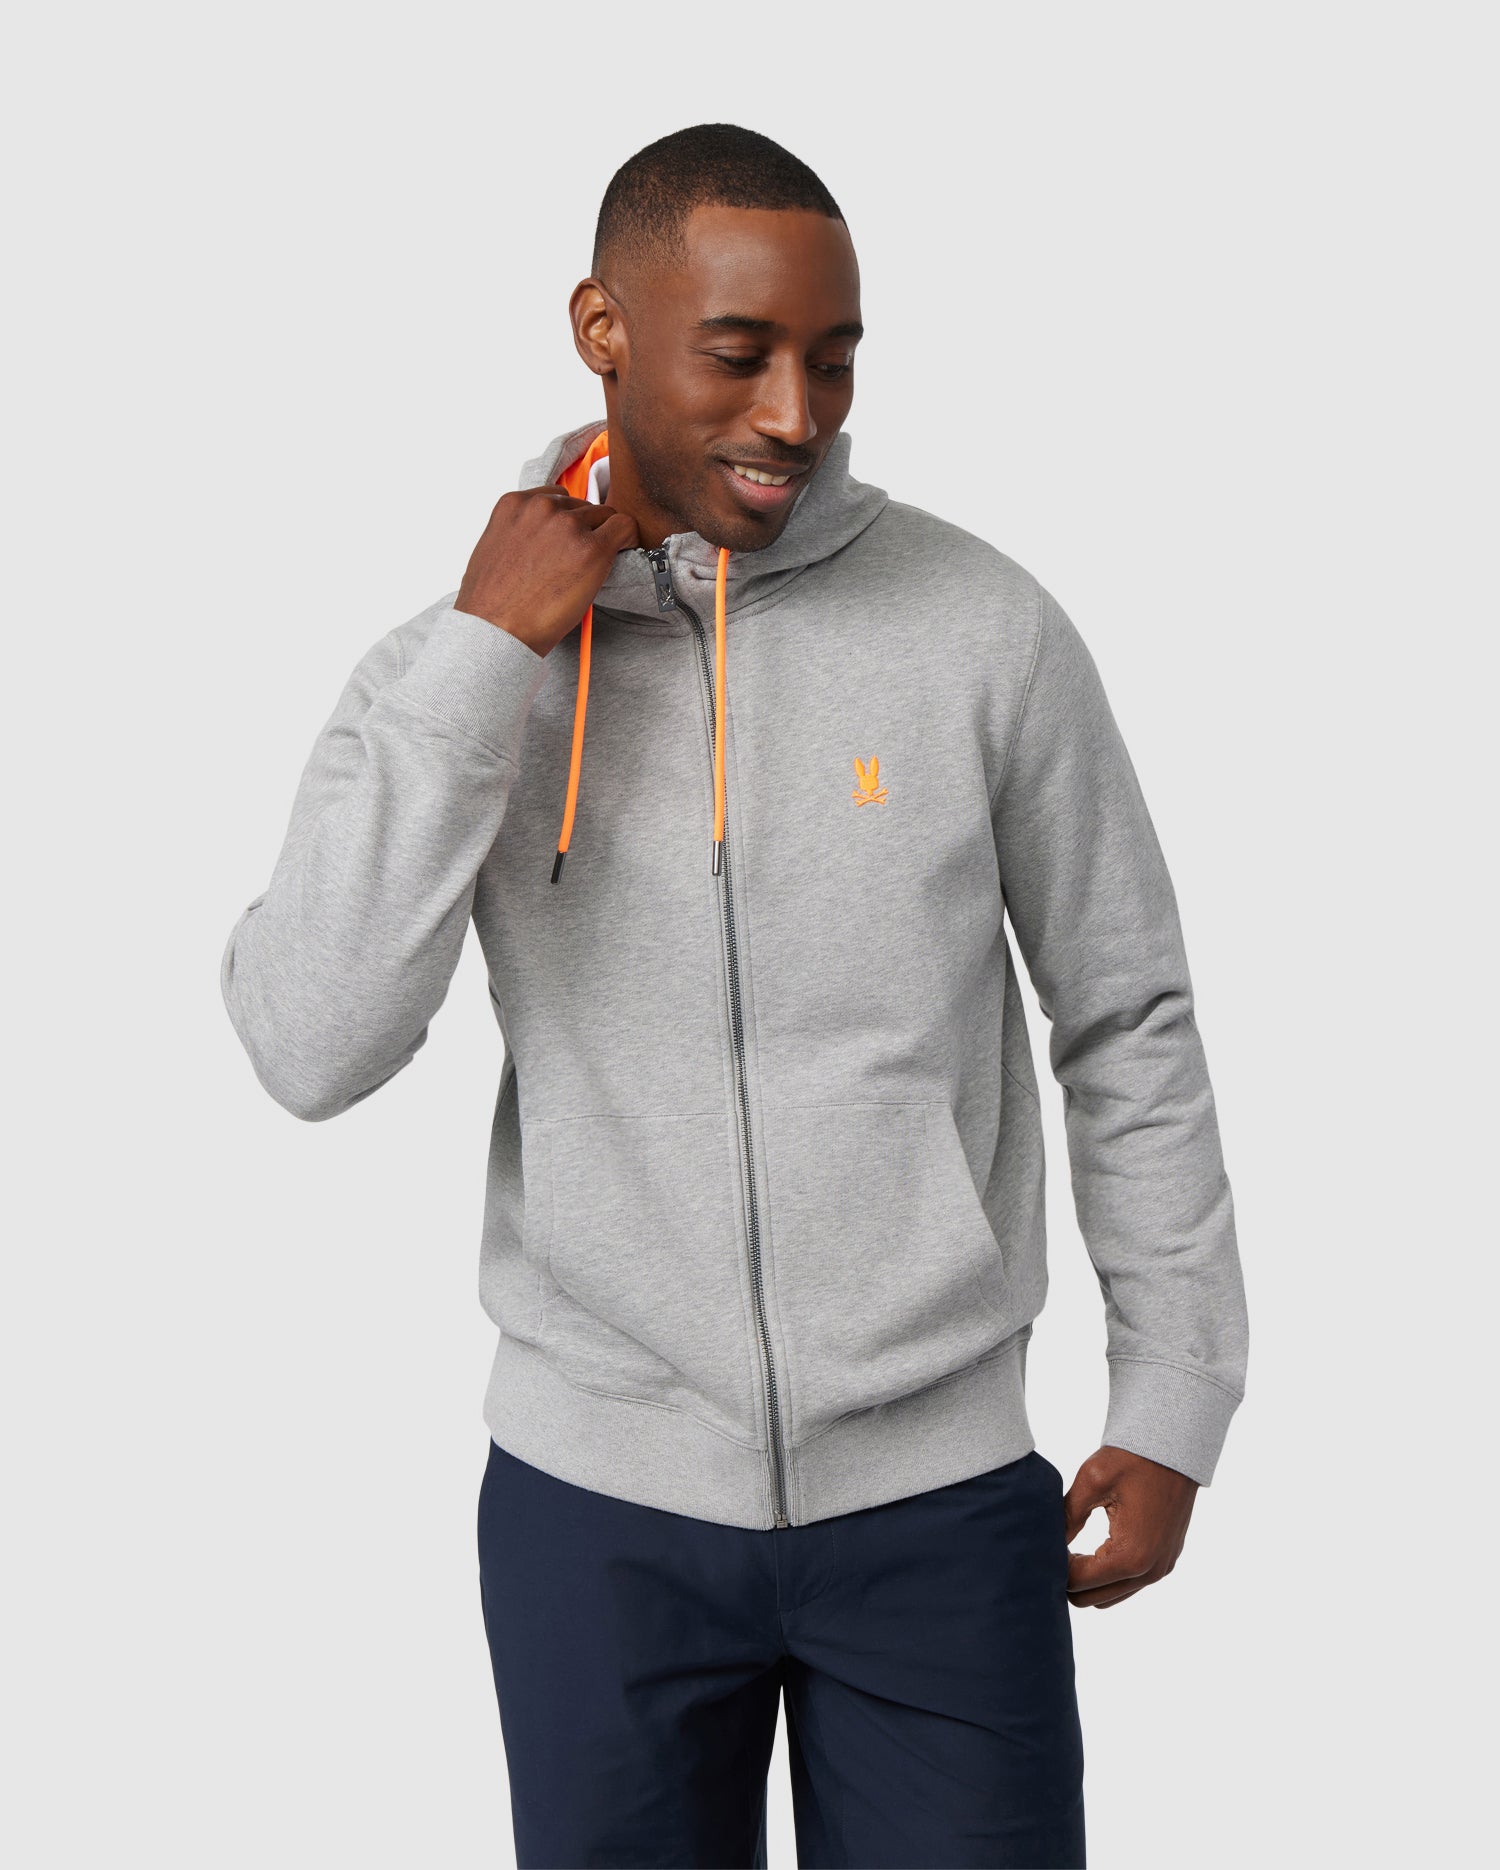 A man smiles while looking down and gently pulling on the hood string of his light gray zip-up Psycho Bunny hoodie. The MENS BUFFALO FULL ZIP HOODIE - B6H175B200 features orange drawstrings and a small orange logo on the left chest. He is also wearing dark blue pants. The background is plain light gray.